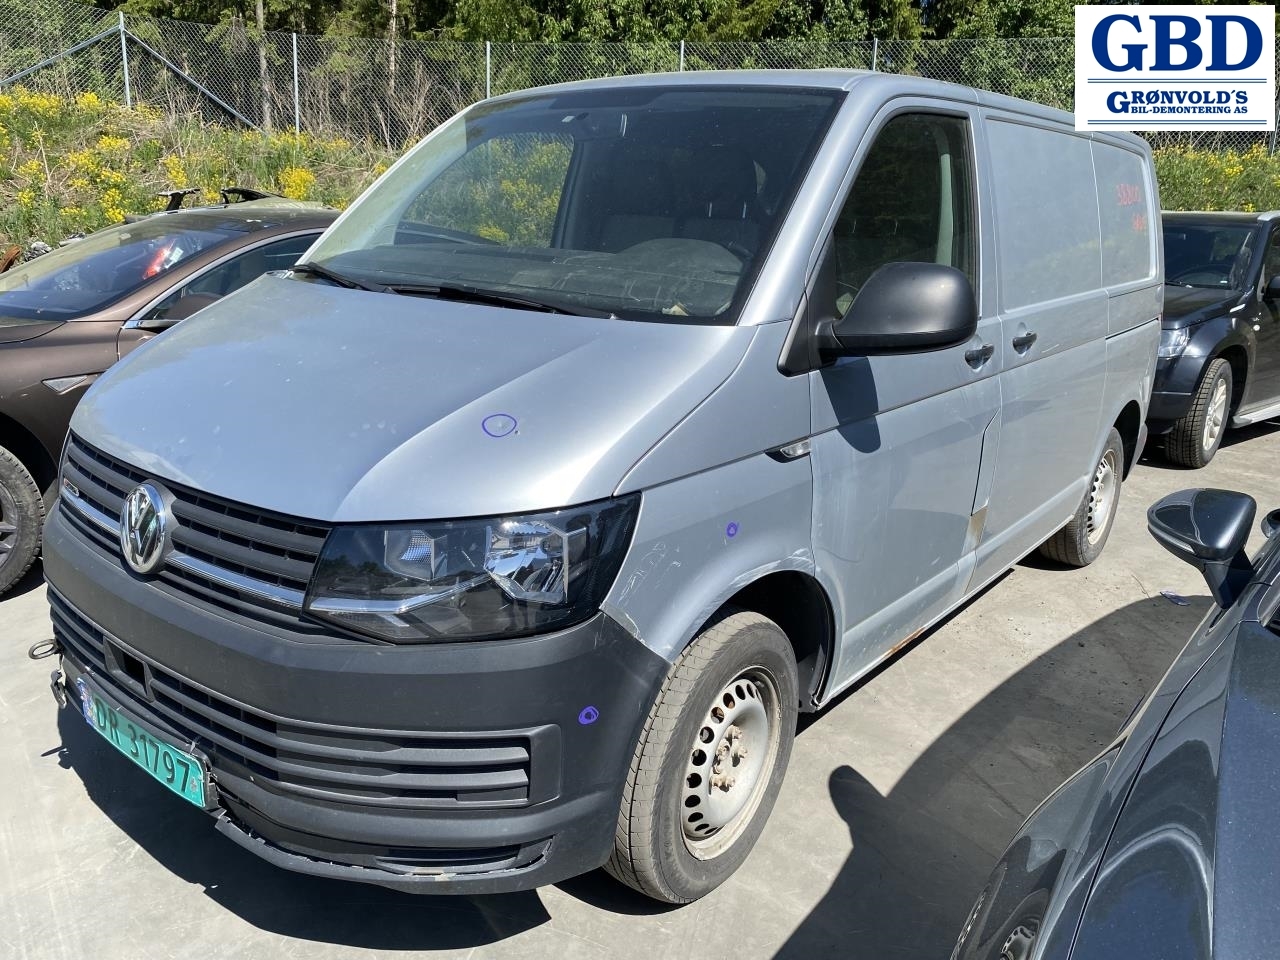 VW Transporter / Caravelle, 2015-2019 (T6) parts car, Engine code: CXHA, Gearbox code: SDF